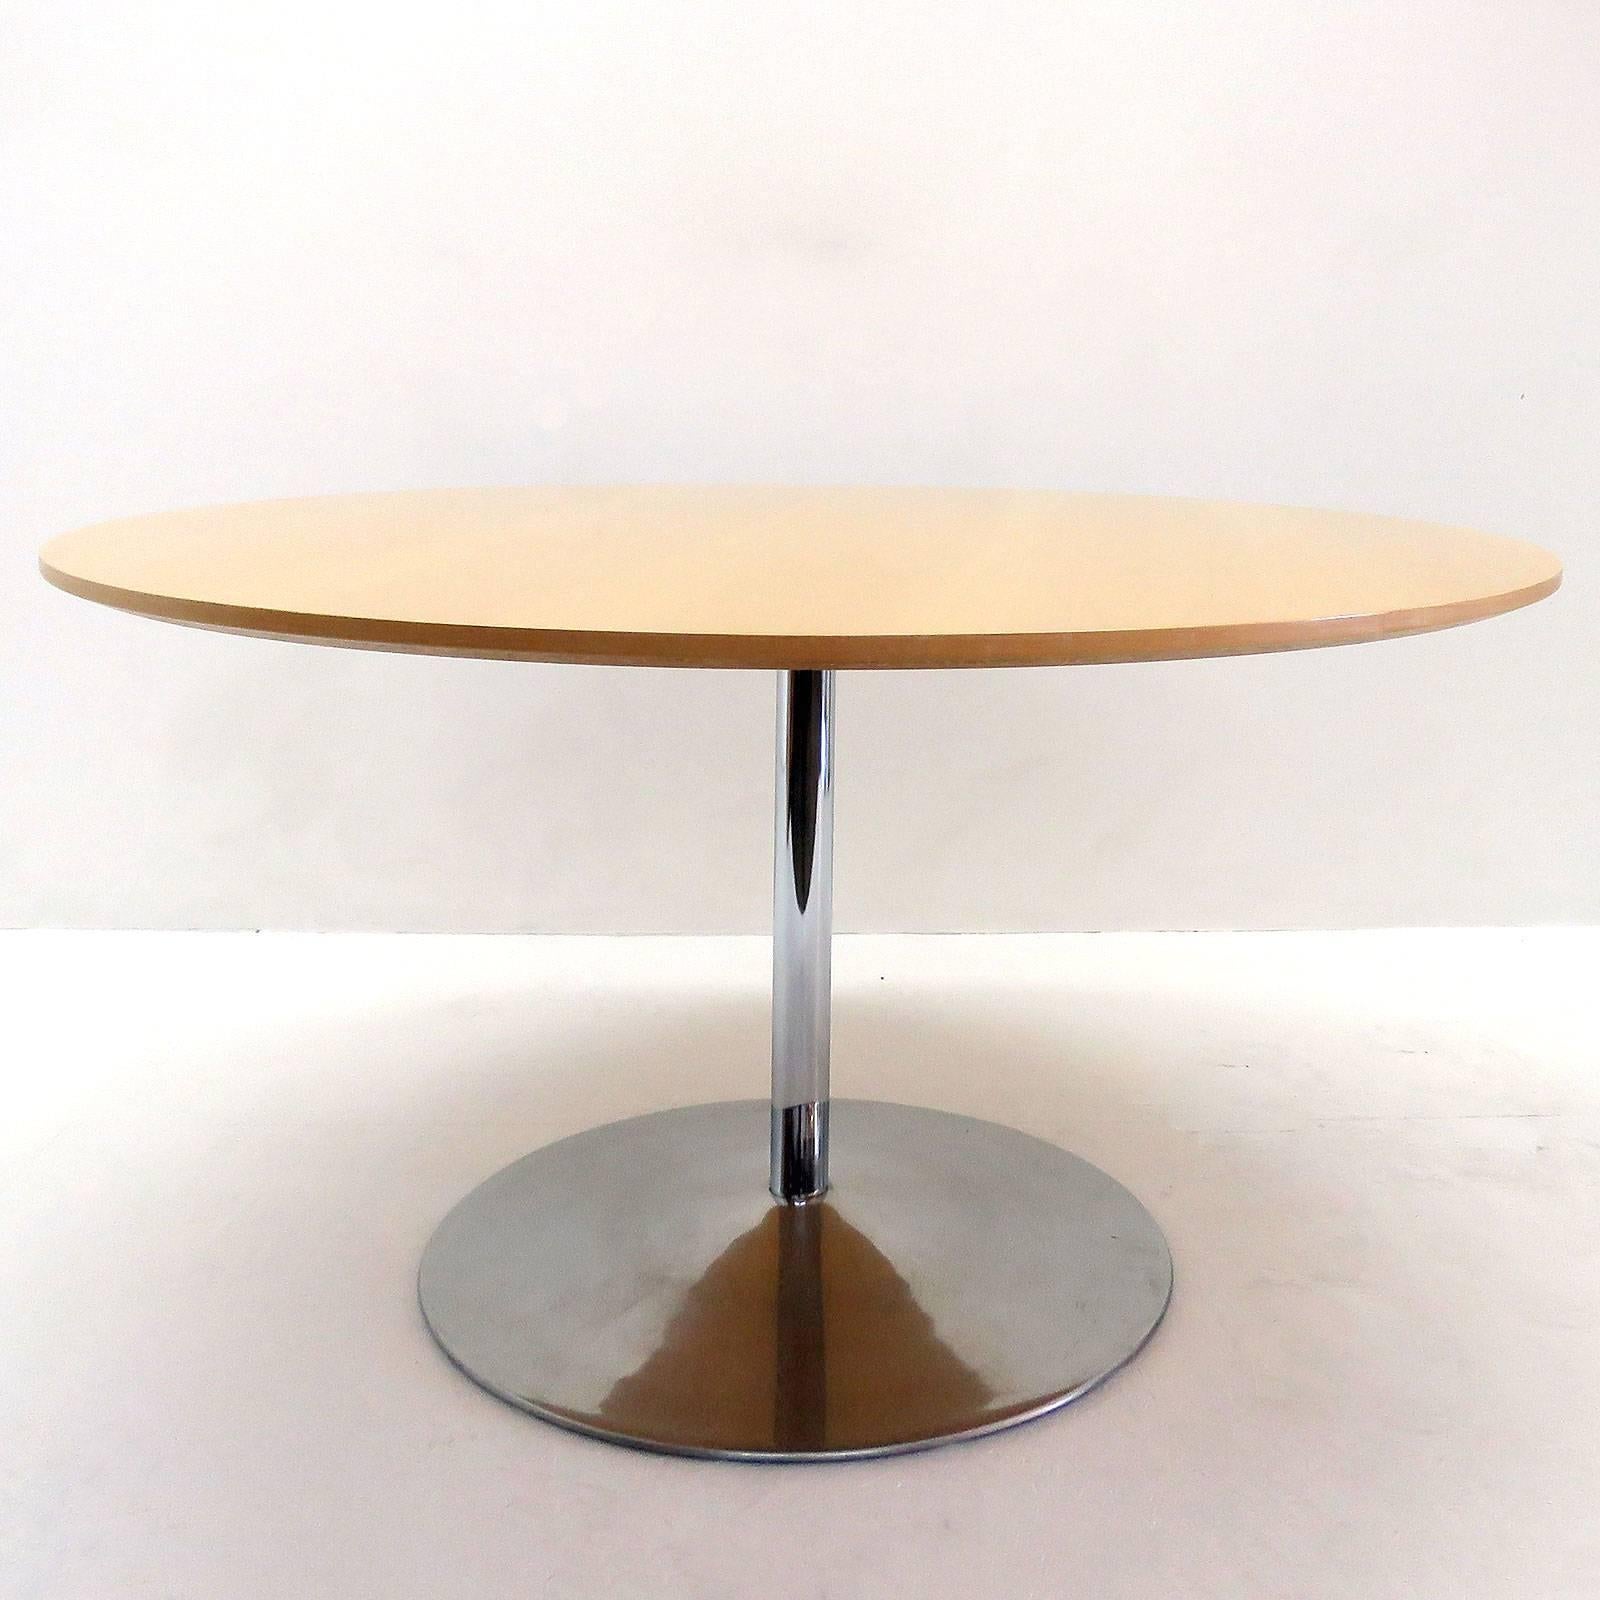 Wonderful, mid-height Verner Panton system 1-2-3 table, designed in 1973 and produced by Fritz Hansen in 1985, marked.